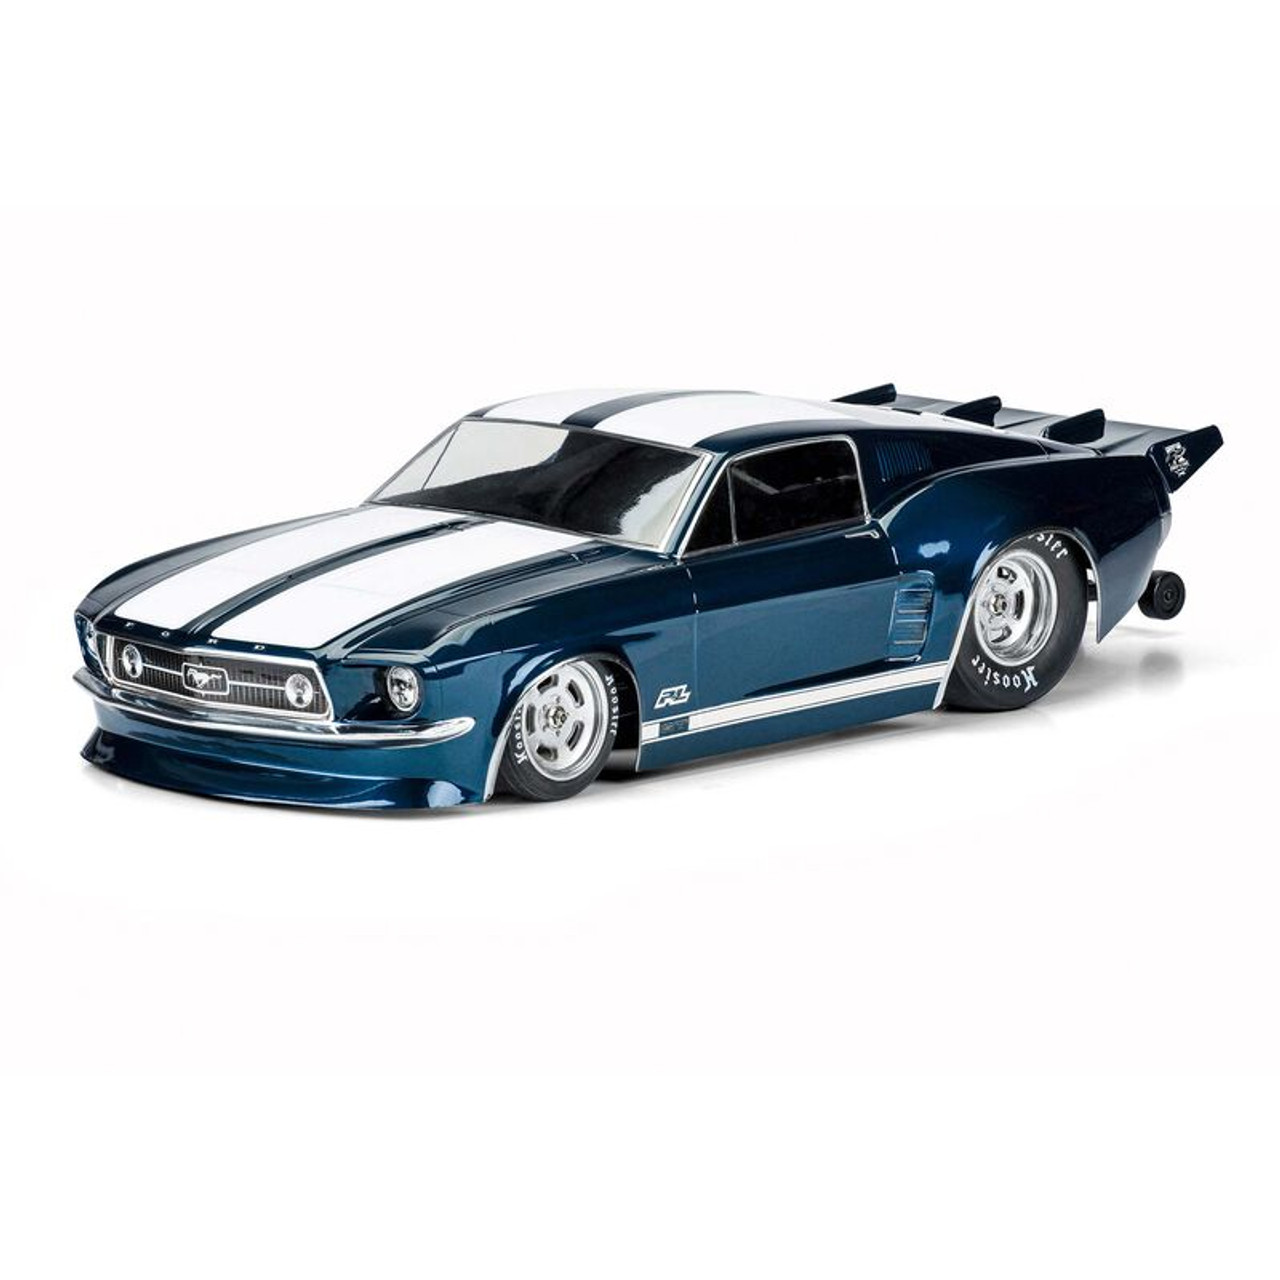 Pro-Line 1/10 1967 Ford Mustang Clear Body: Drag Car (PRO357300)| No ...